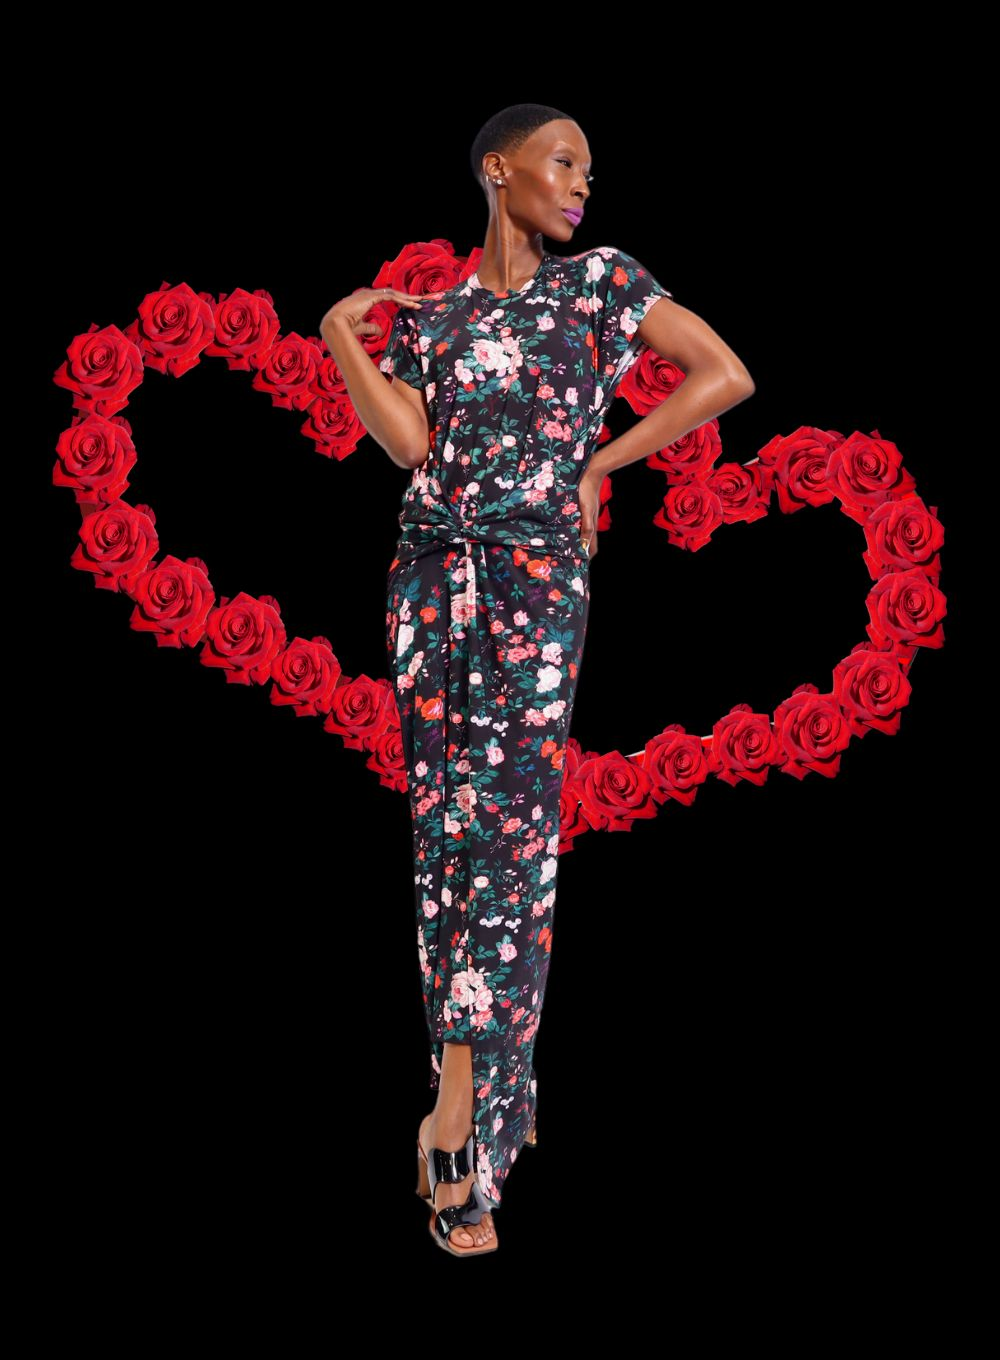 VALENTINES DAY COLLECTION IMAGE: PACO RABANNE FLORAL DRESS